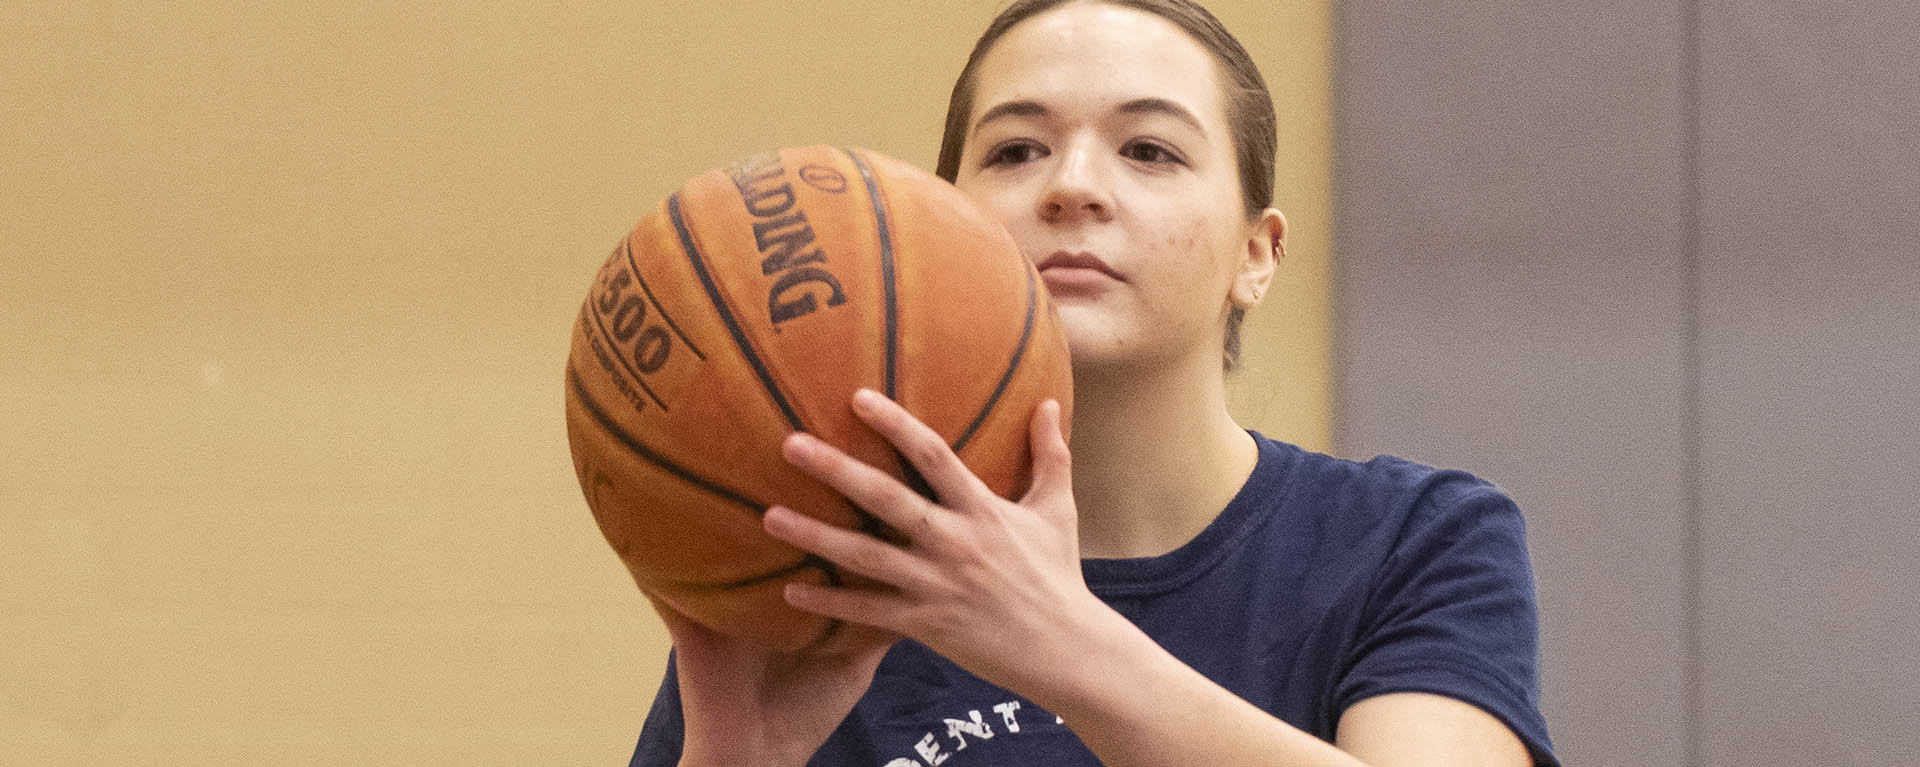 A student lines up a shot with her basketball.